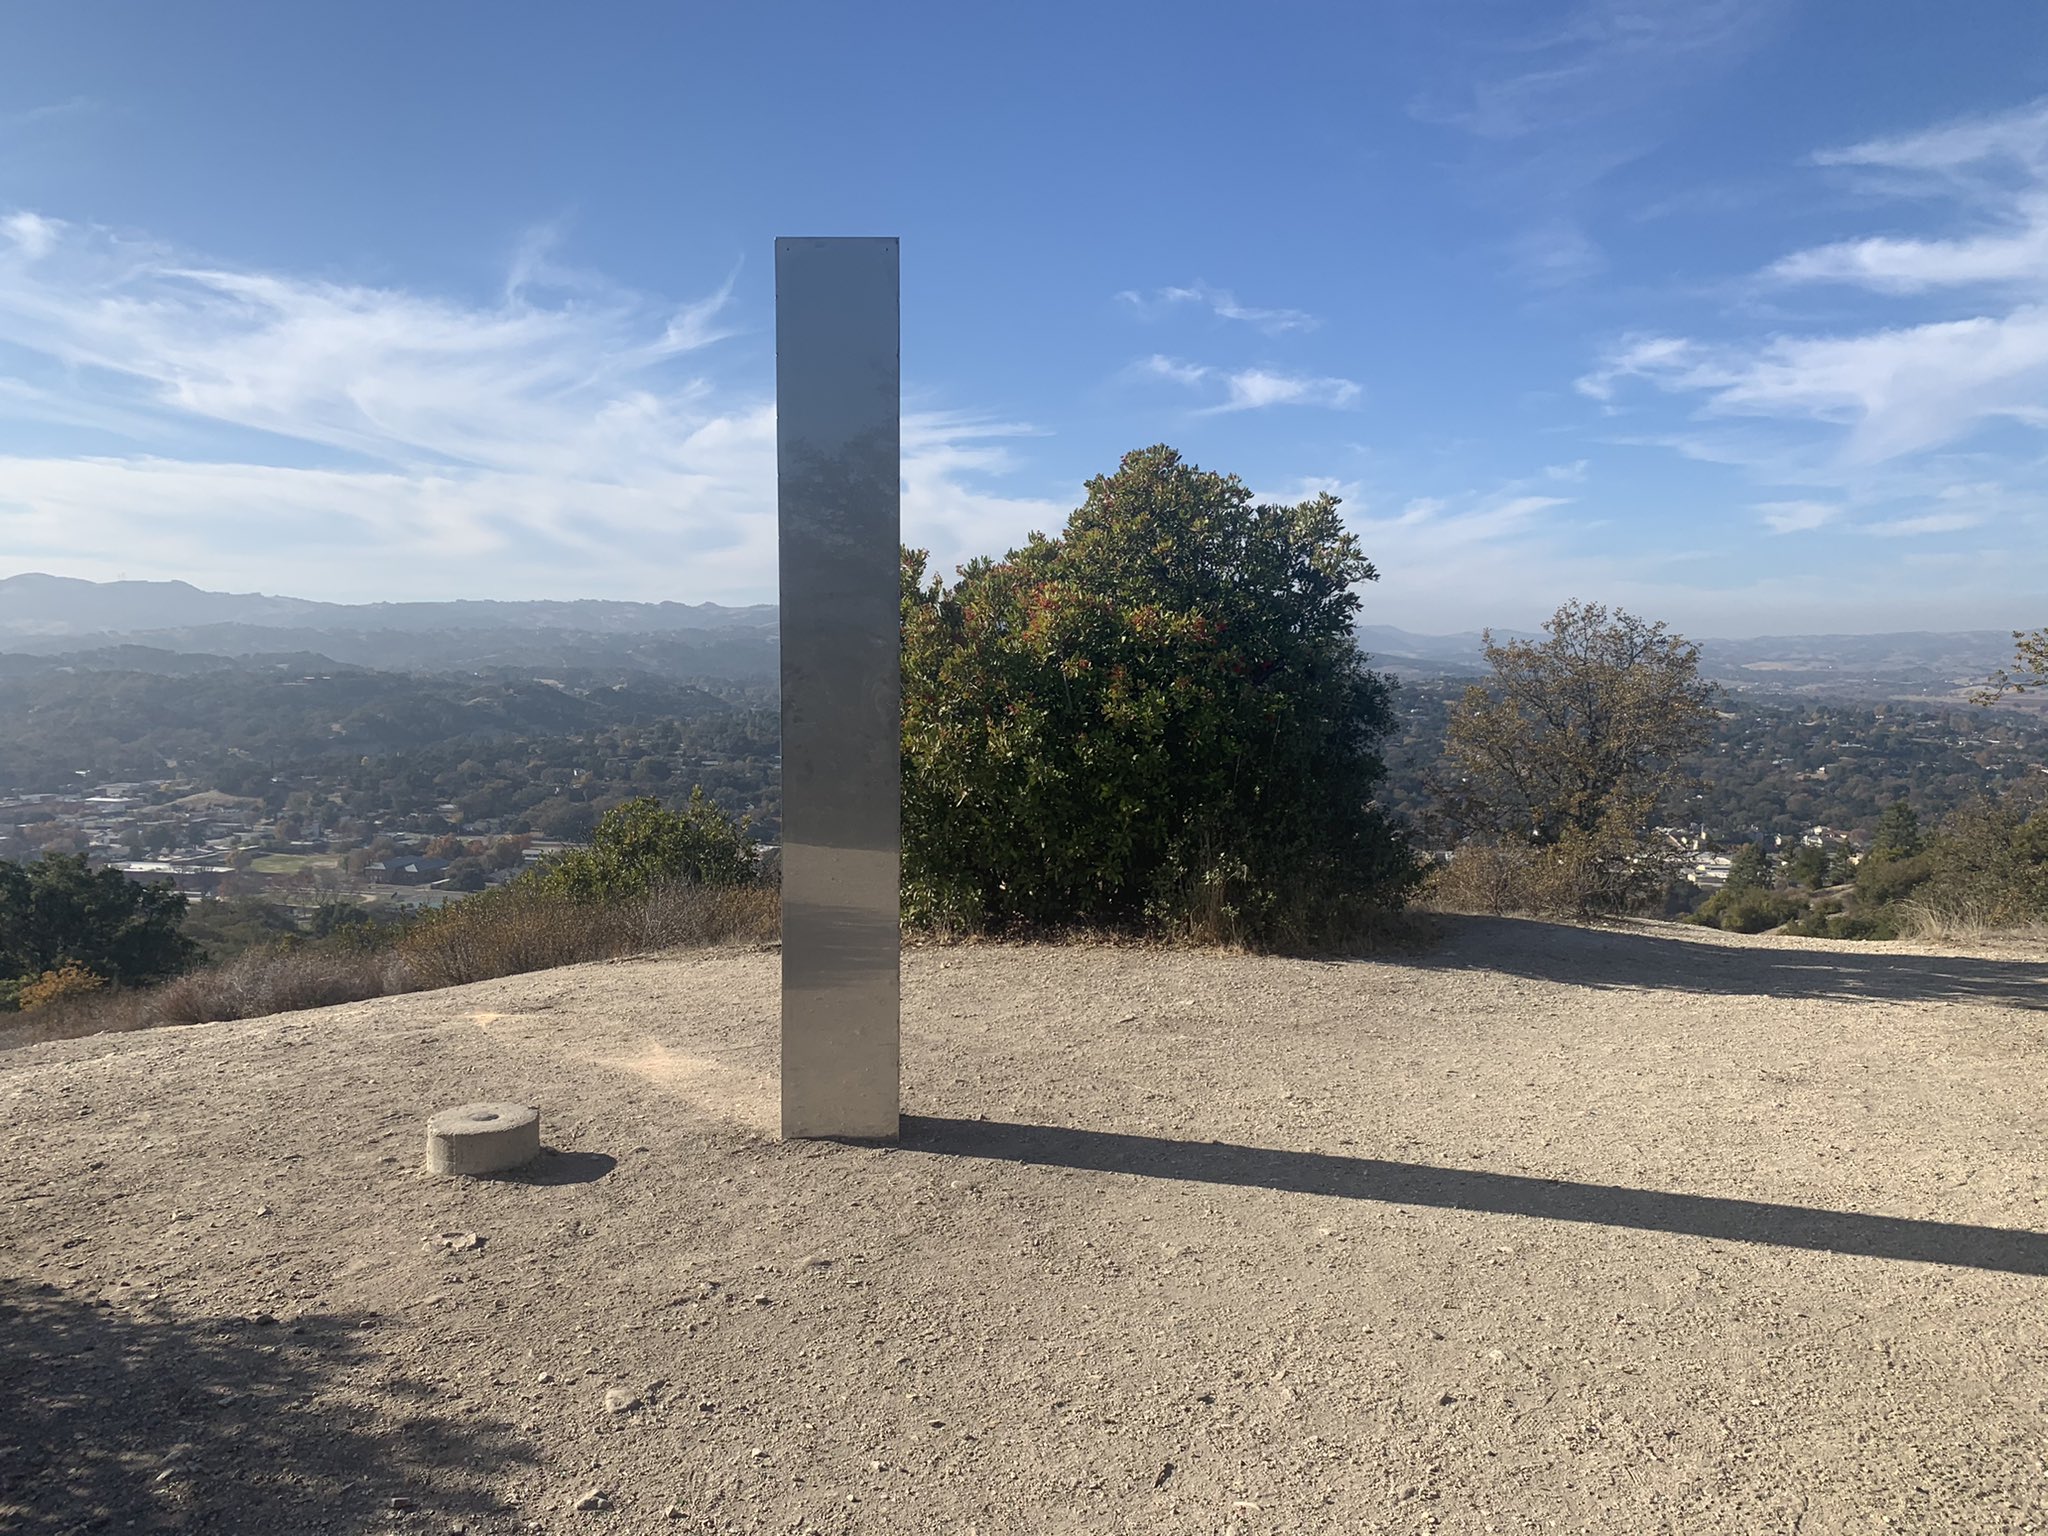 Another Metal Monolith Found In California